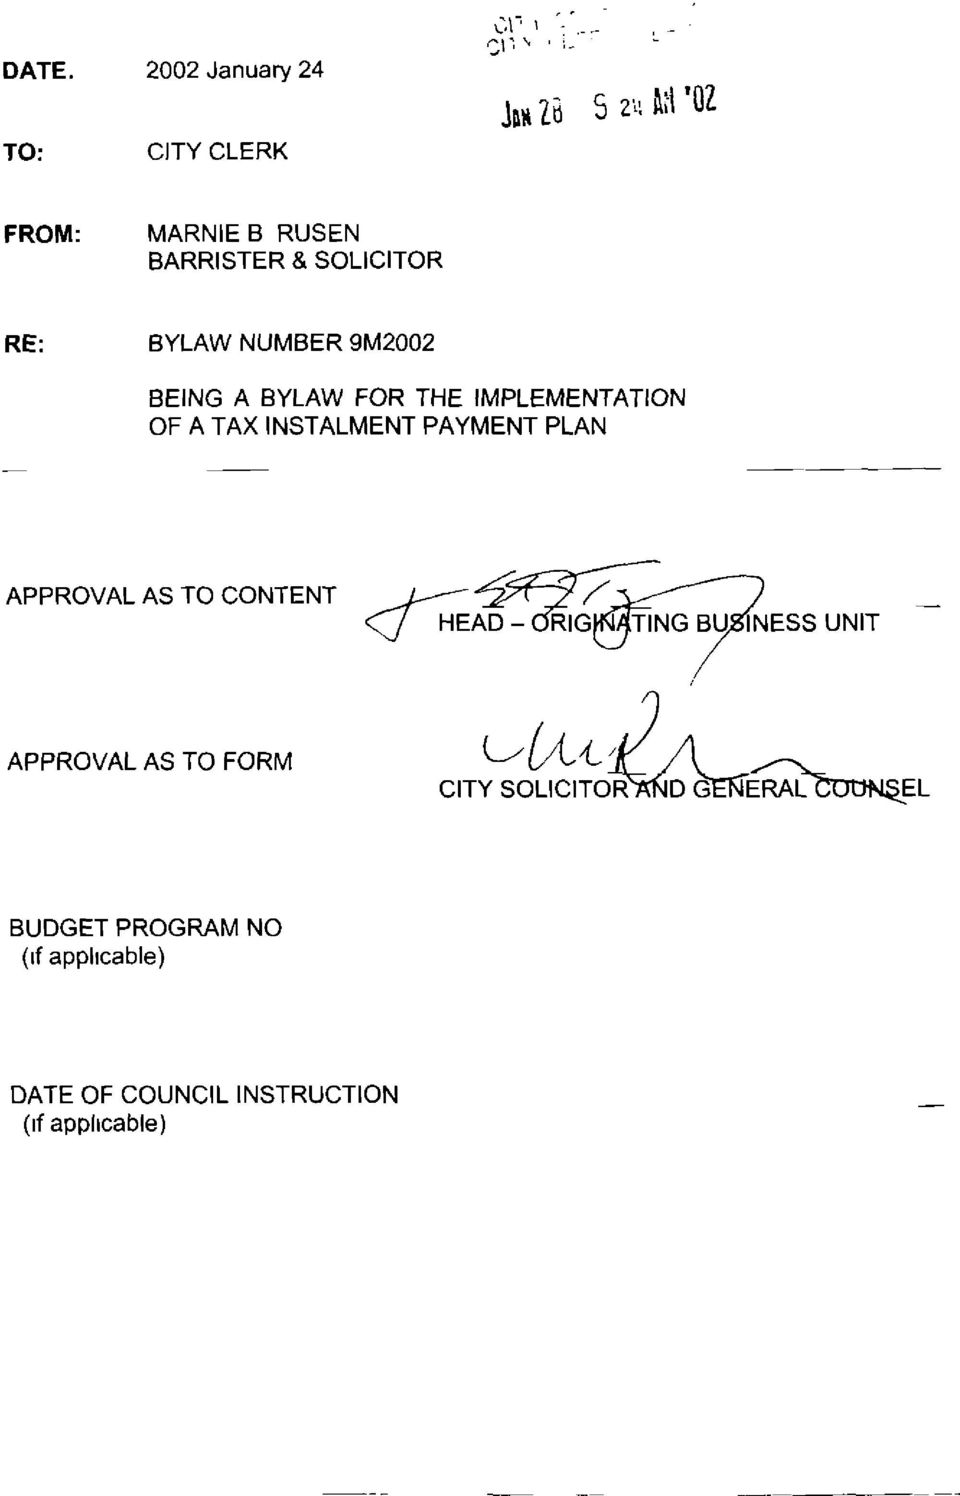 INSTALMENT PAYMENT PLAN APPROVAL AS TO CONTENT / HEAD - RIG TING APPROVAL AS TO FORM